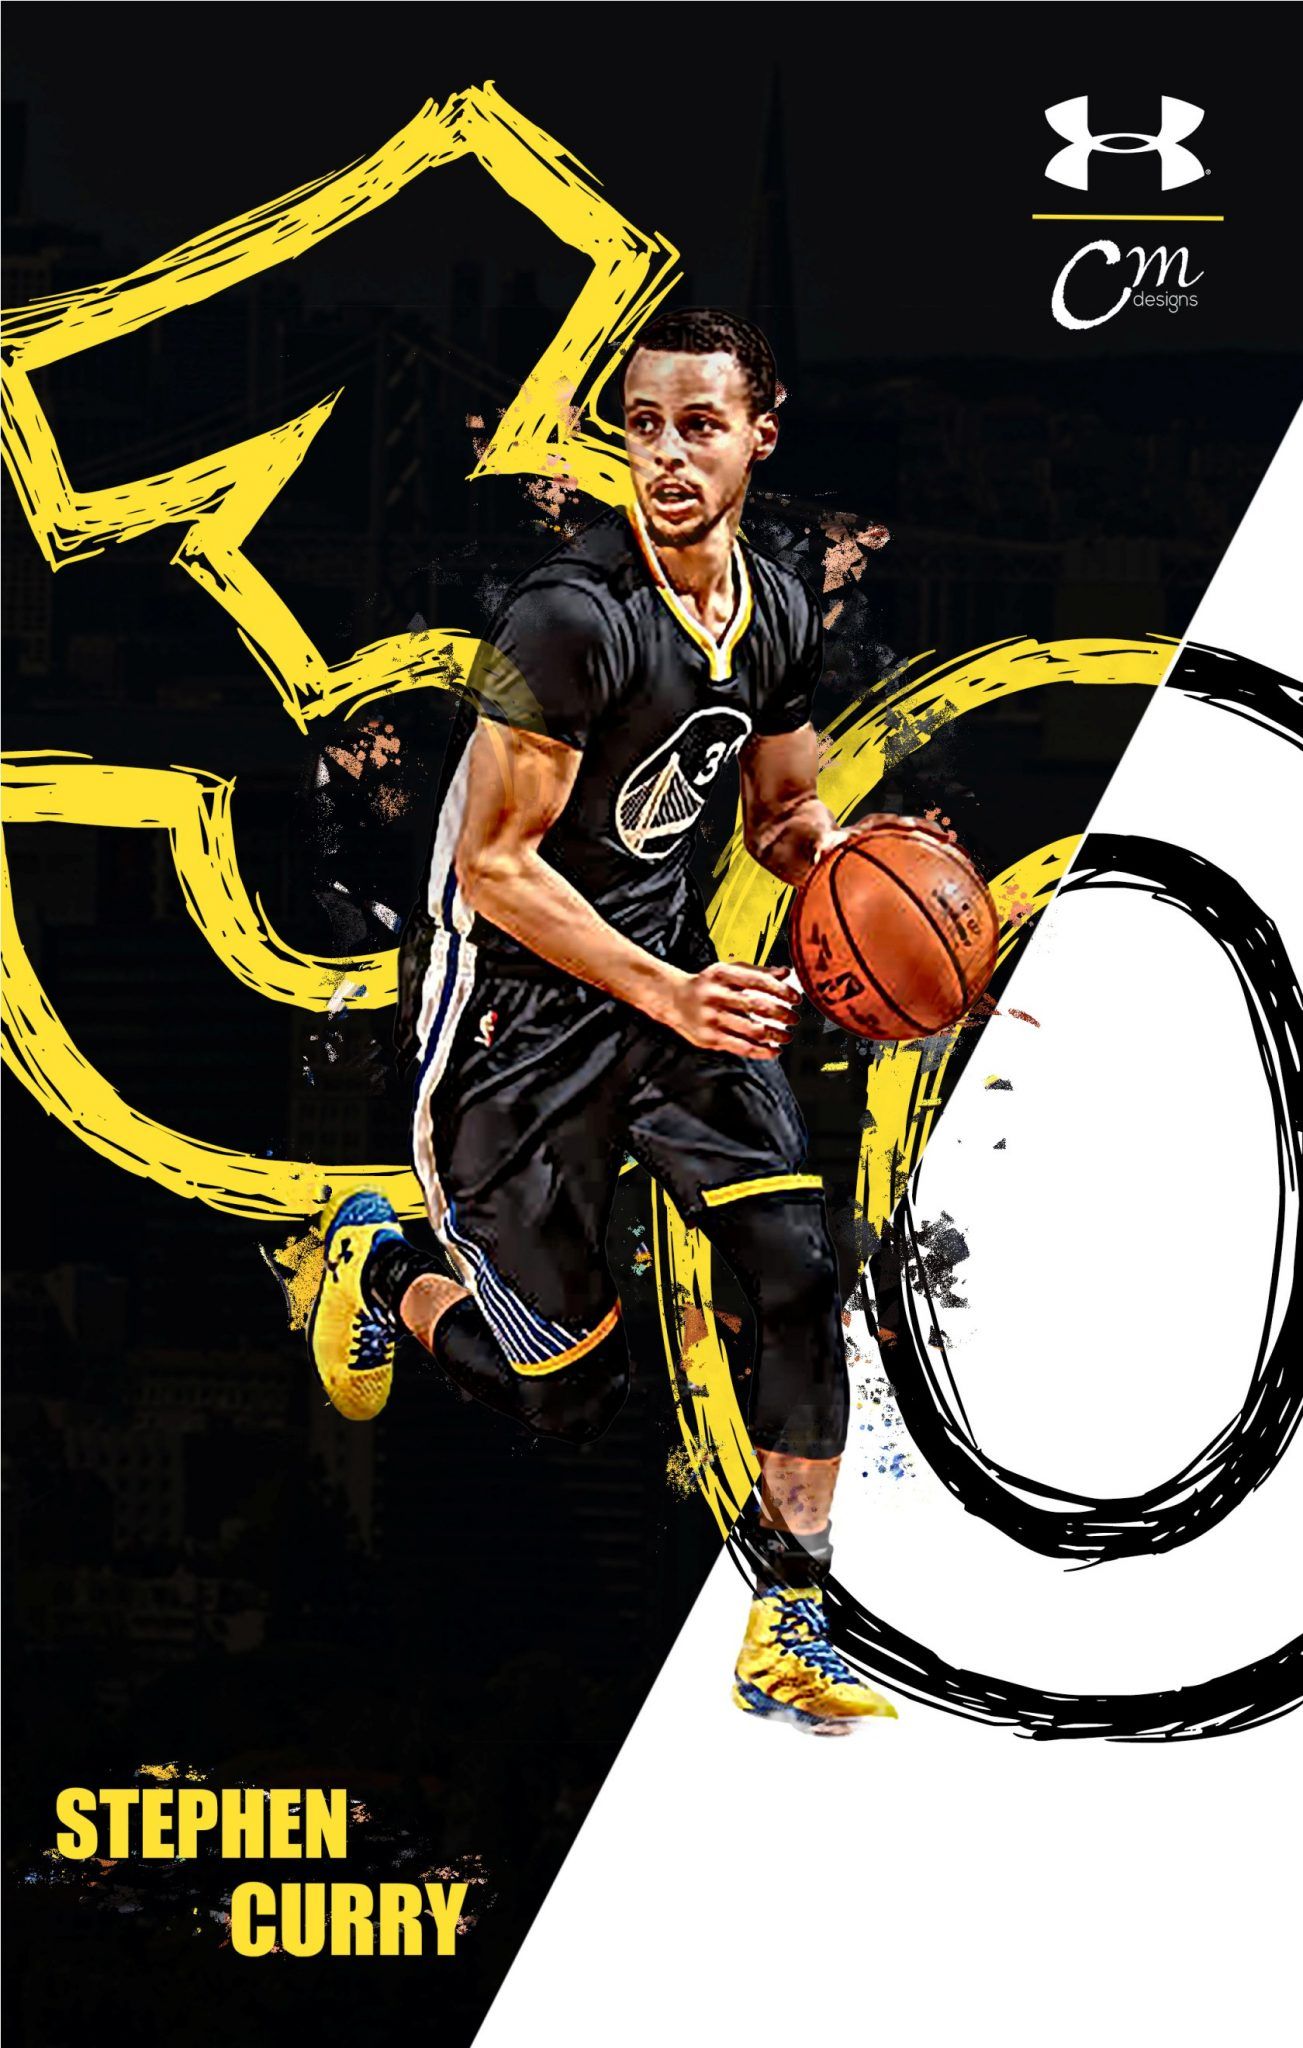 Download Stephen Curry 2020 Wallpaper 1680x2640 Curry